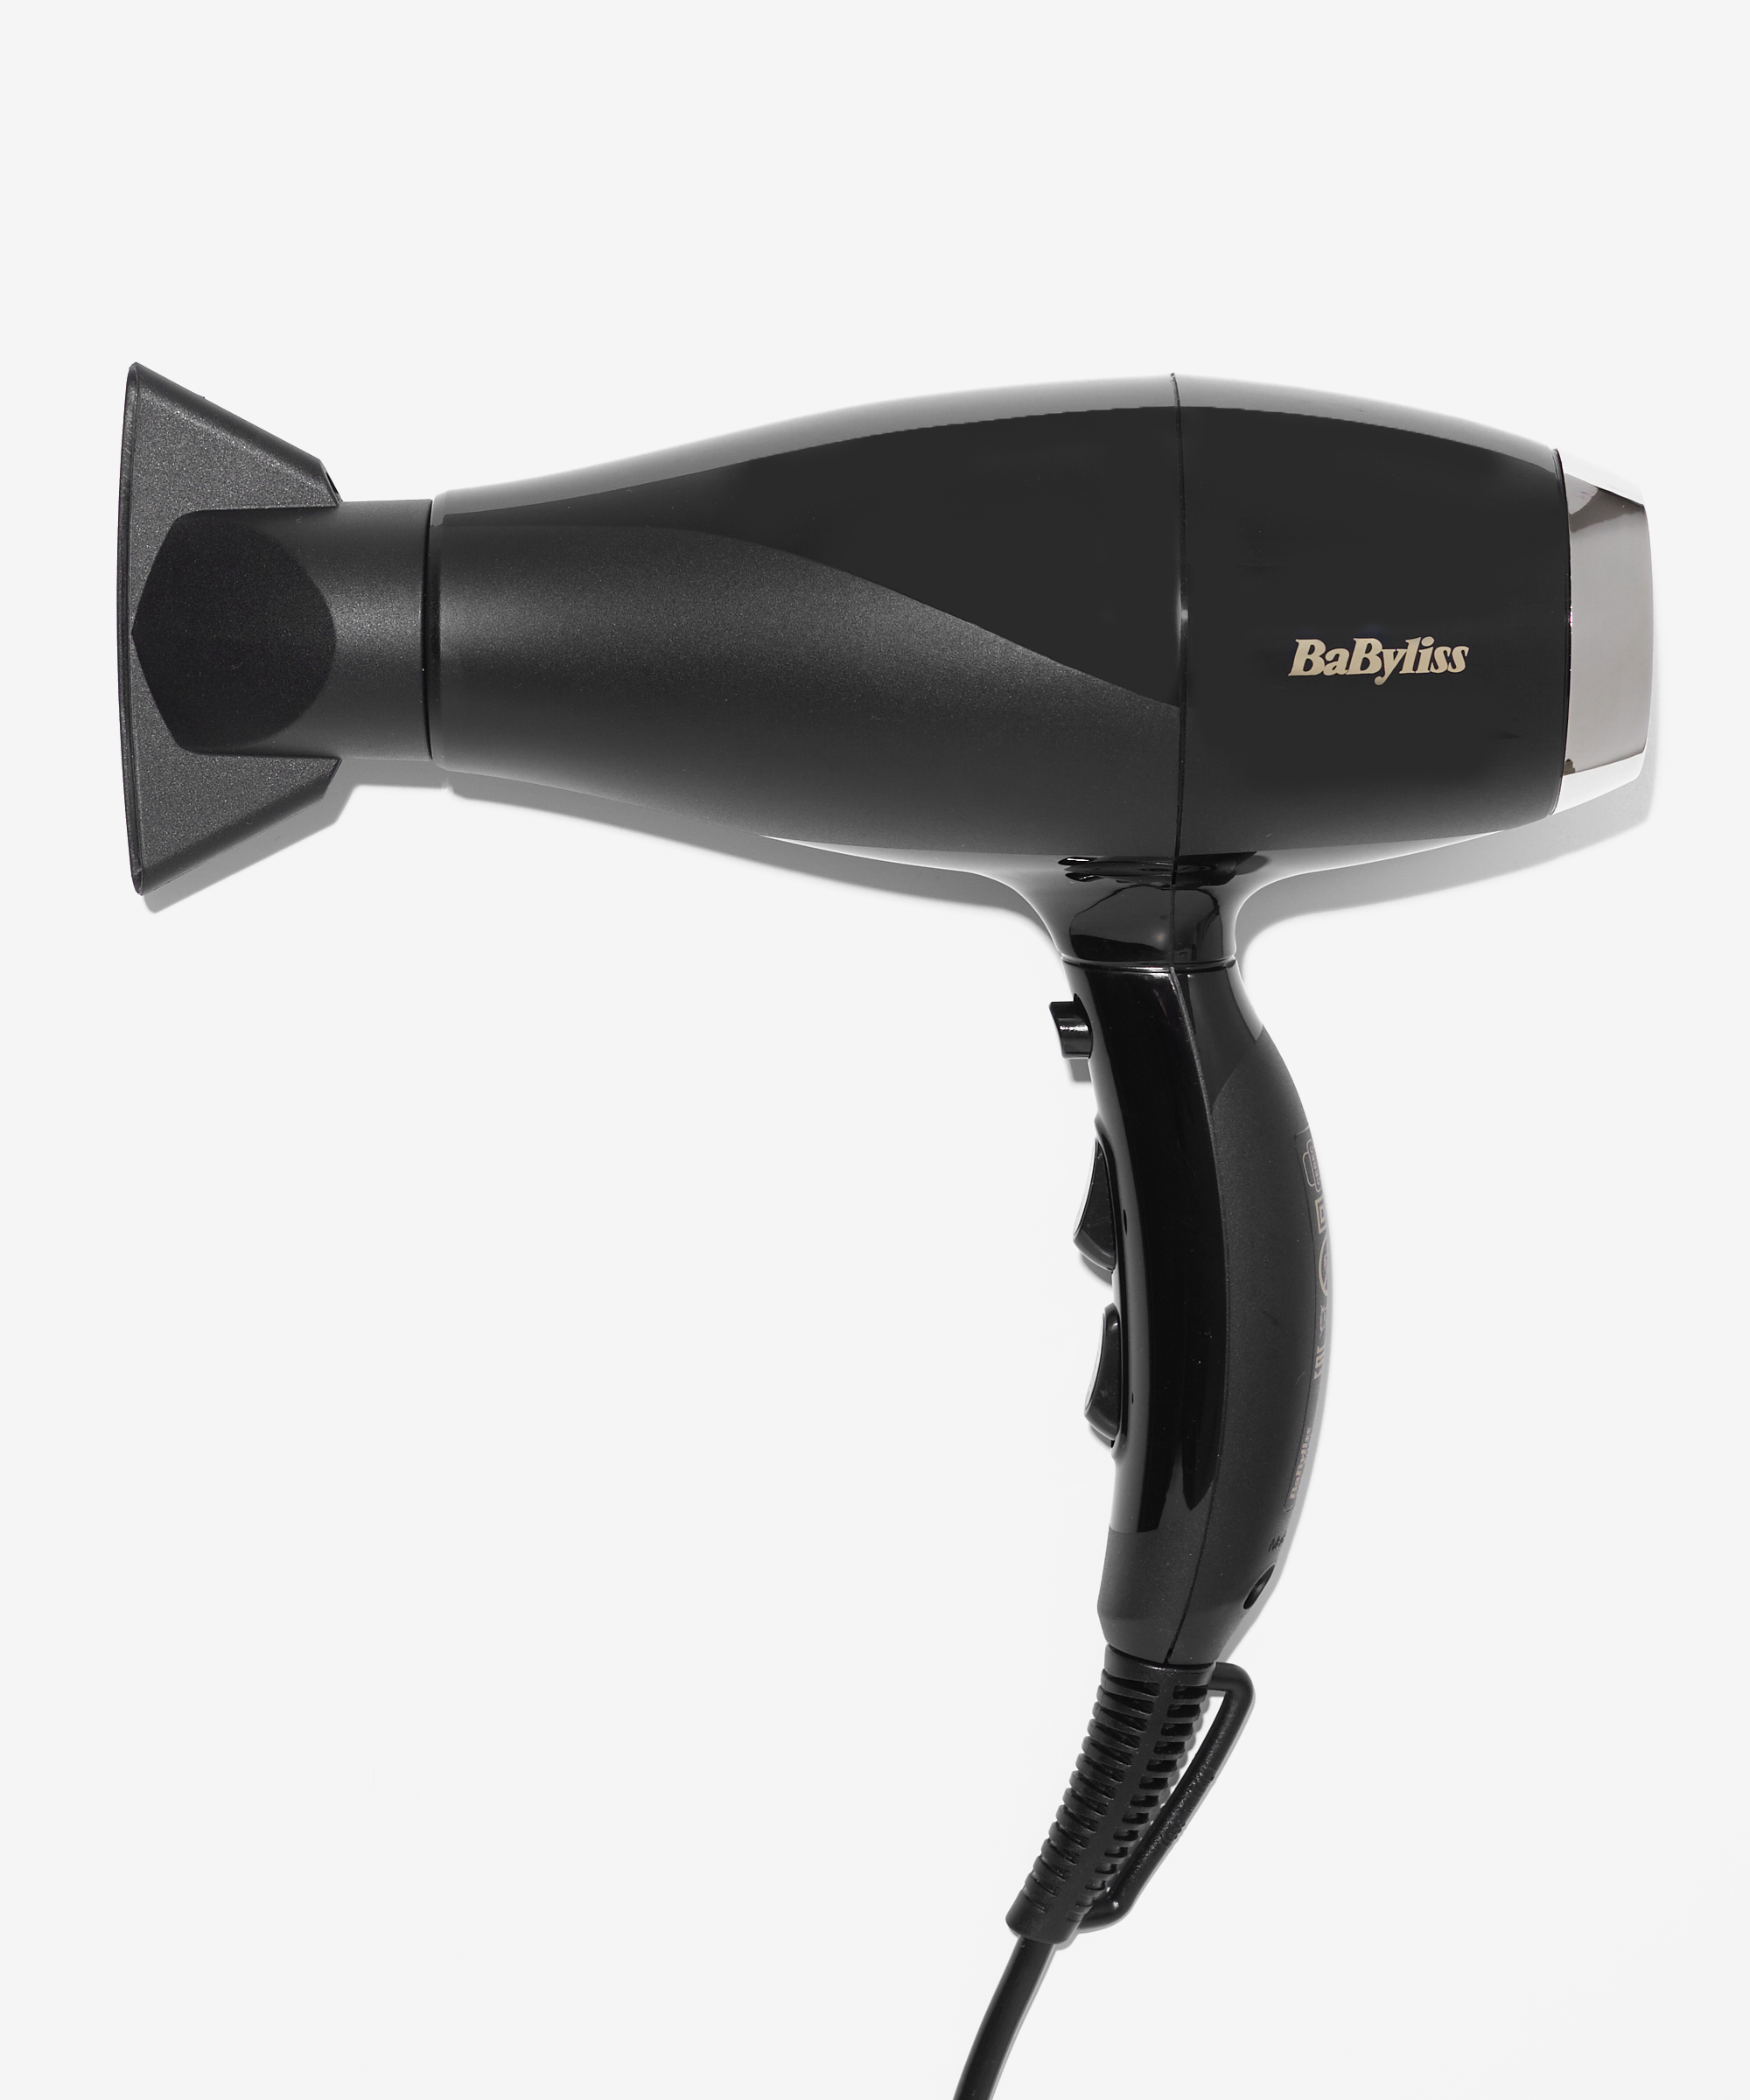 BaByliss Air Pro 2300 BEAUTY Dryer at Hair BAY